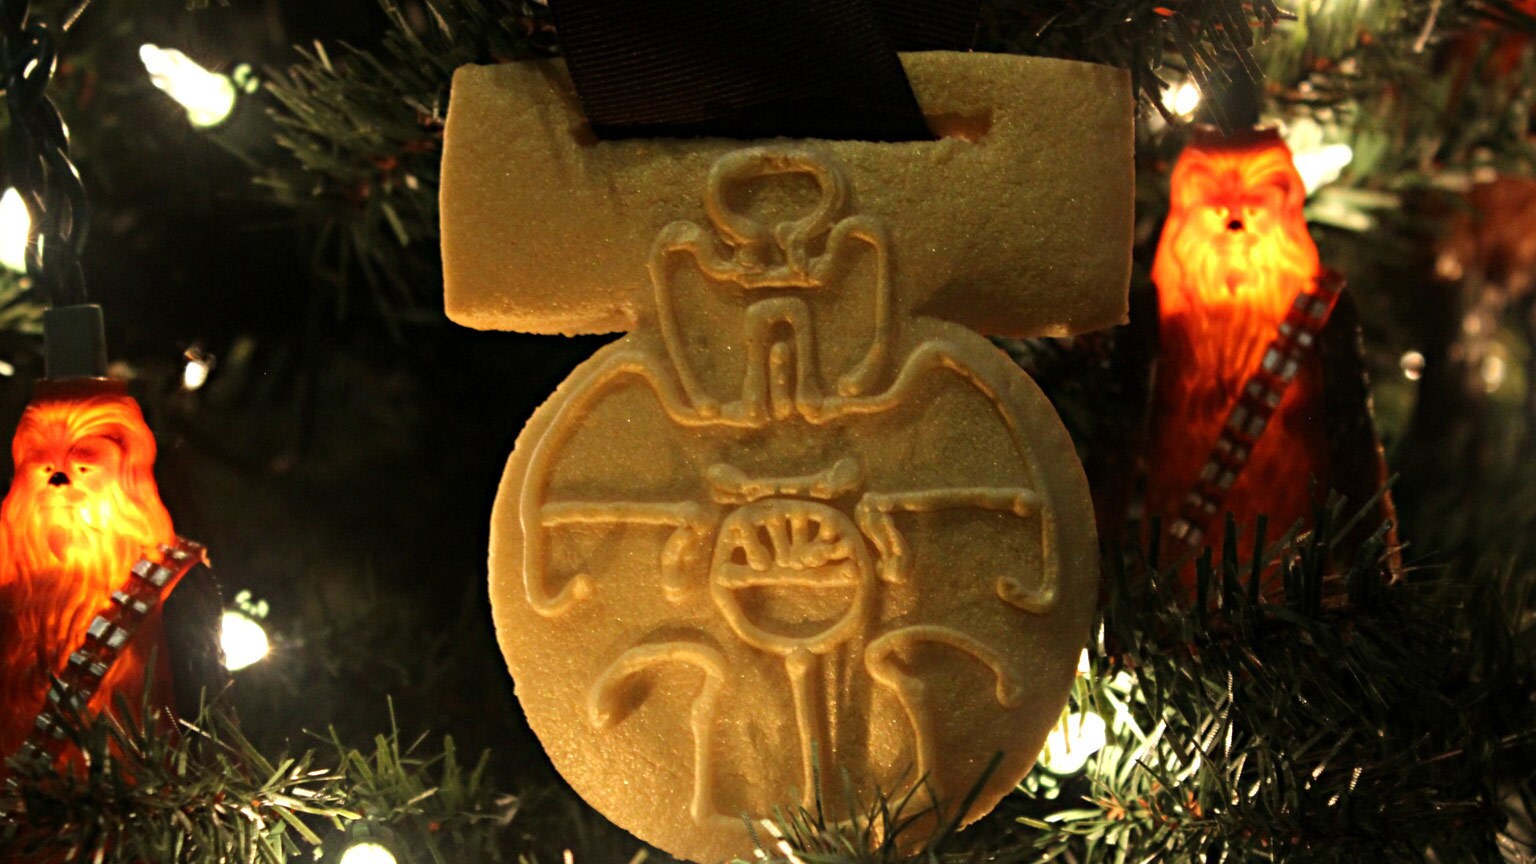 With This Cookie Recipe, Everyone Gets a Medal of Yavin